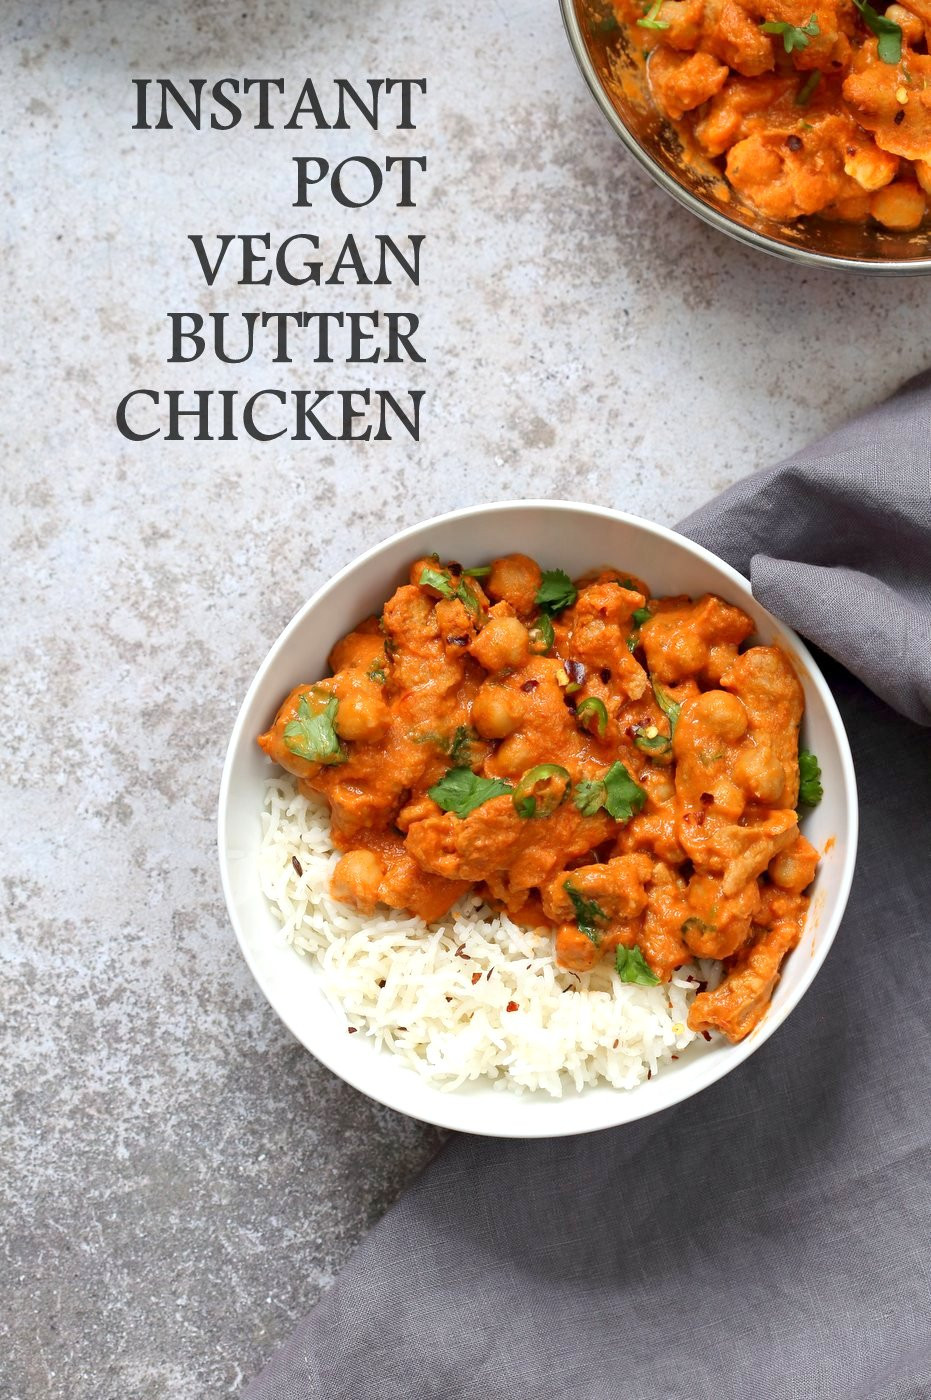 Soy Free Vegan Recipes
 Instant Pot Vegan Butter Chicken with Soy Curls and